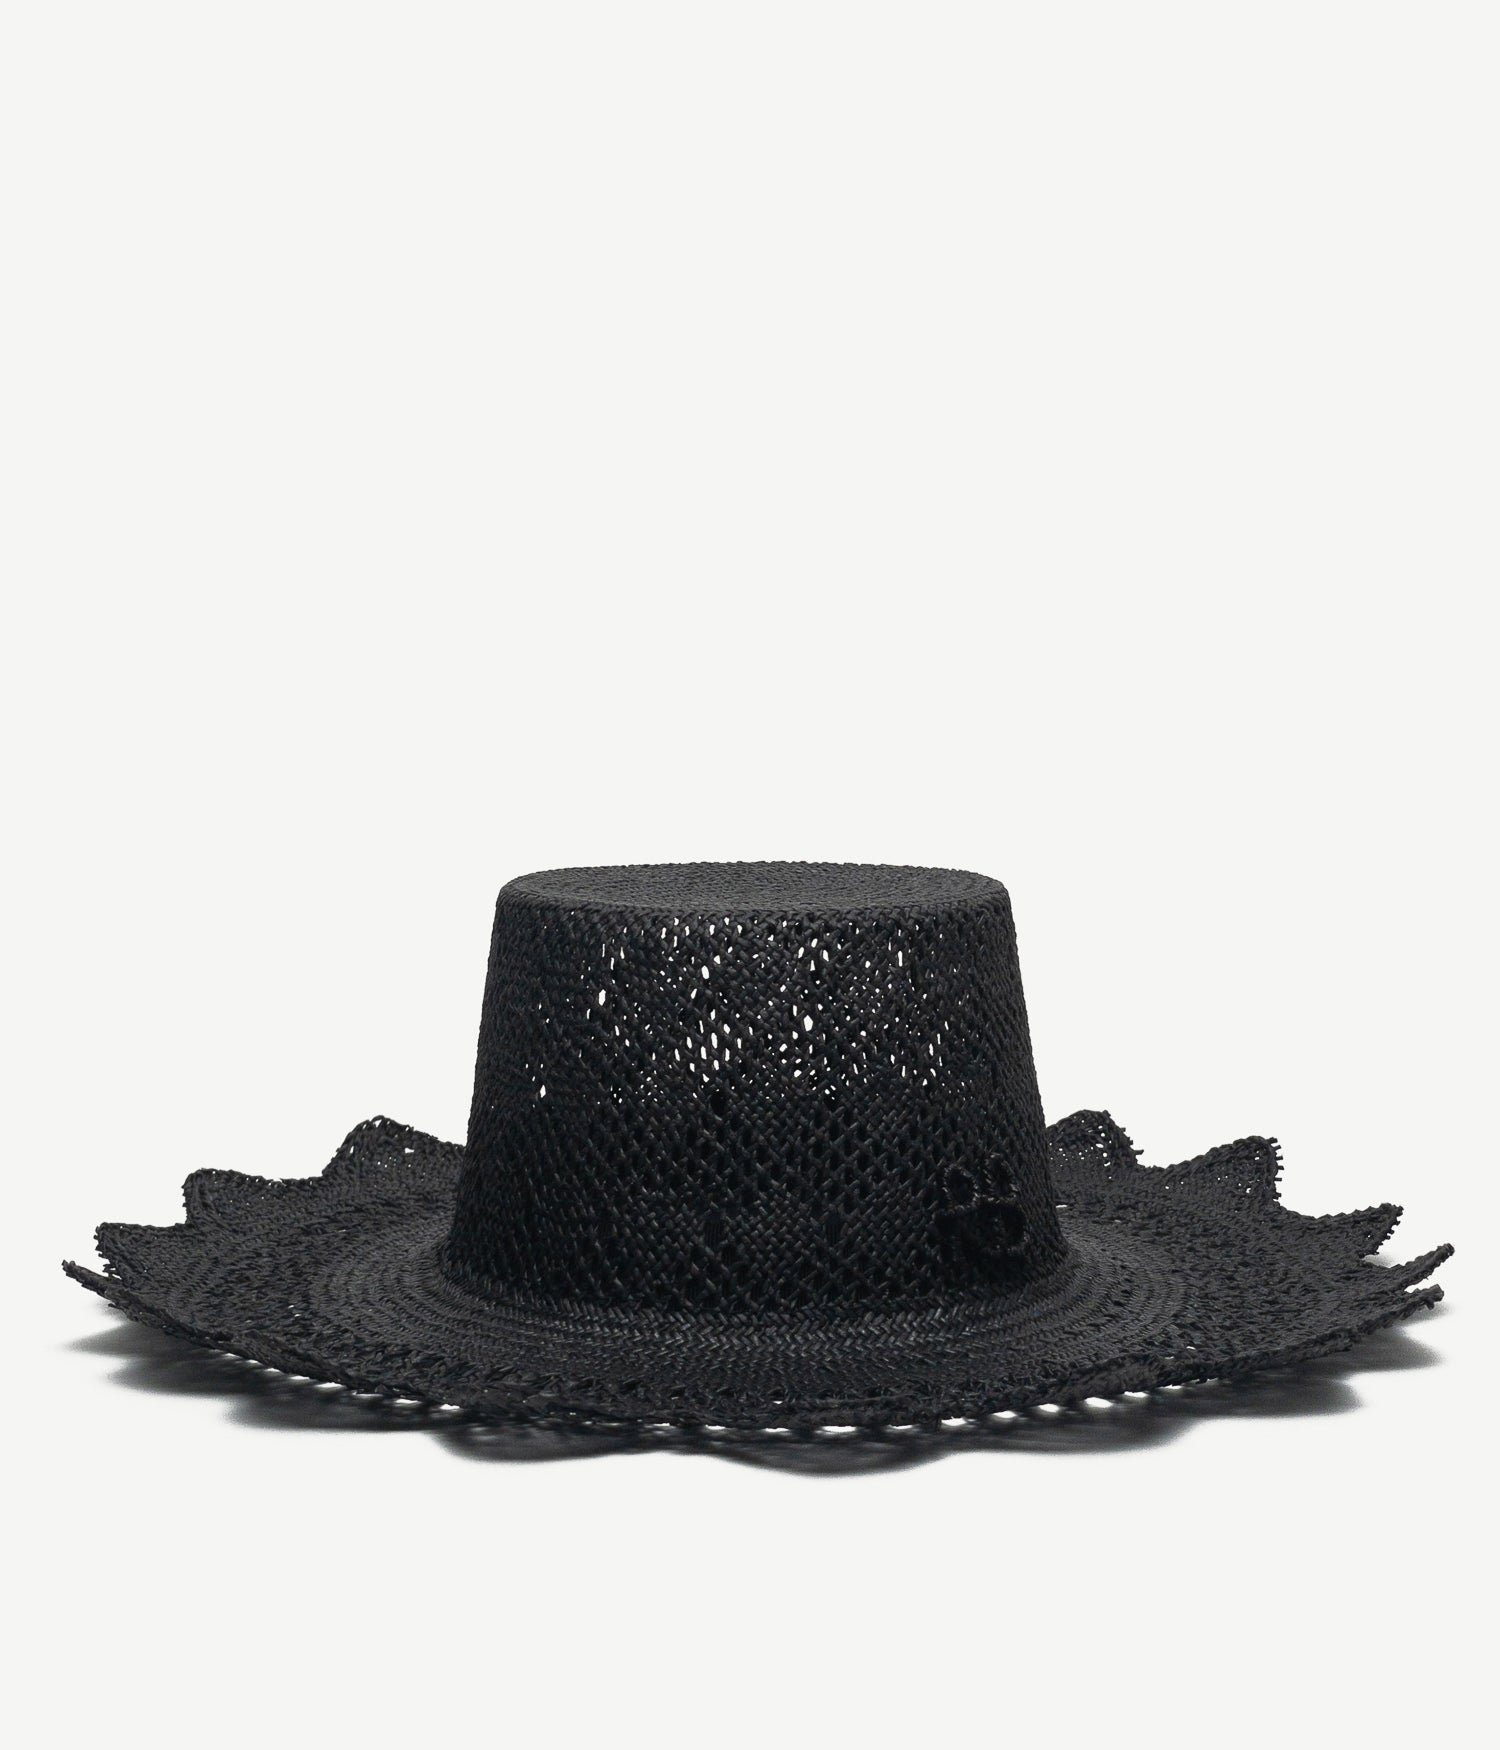 Hats • Ruslan Baginskiy Hats & Accessories - United States| Page 5